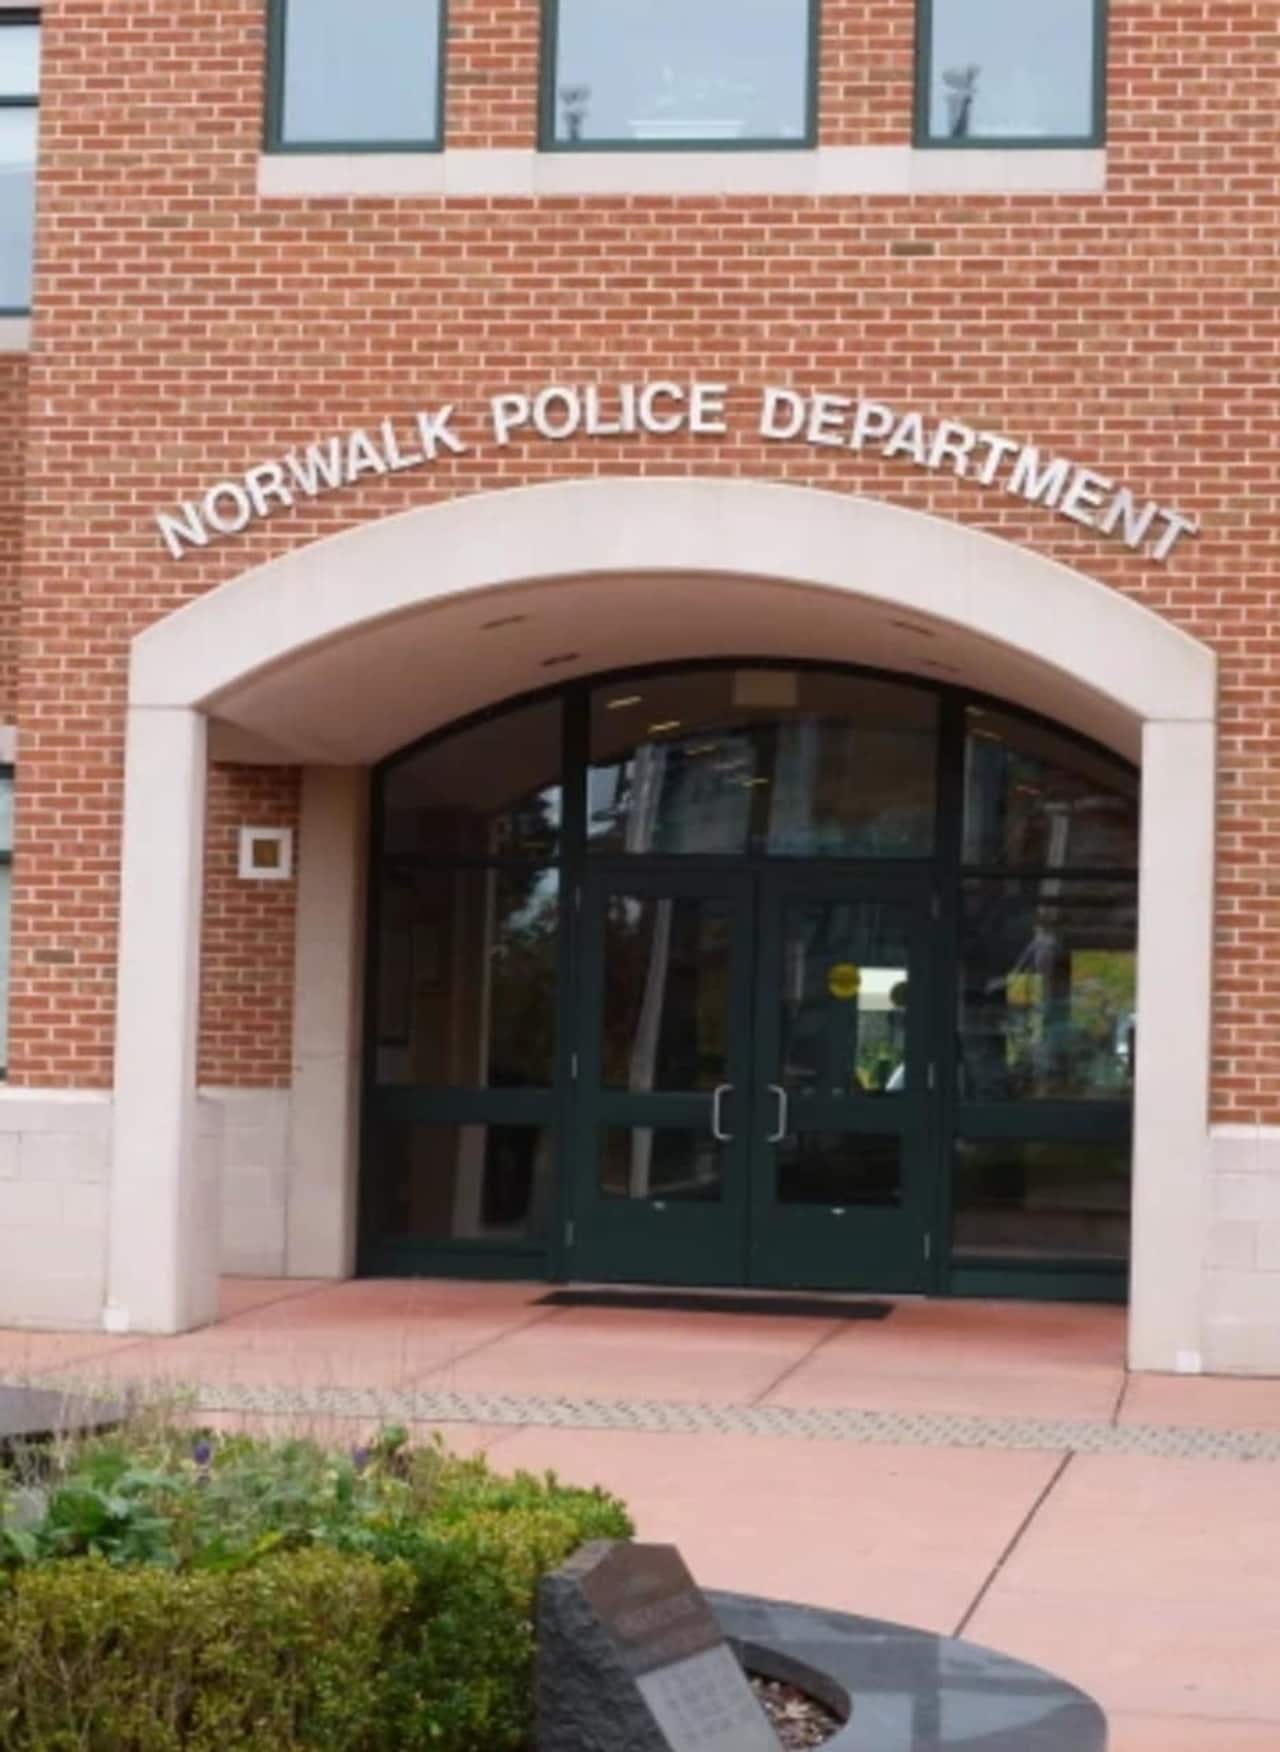 The Norwalk Police Department is asking for help in solving the 1990 murder of a young Norwalk mother.